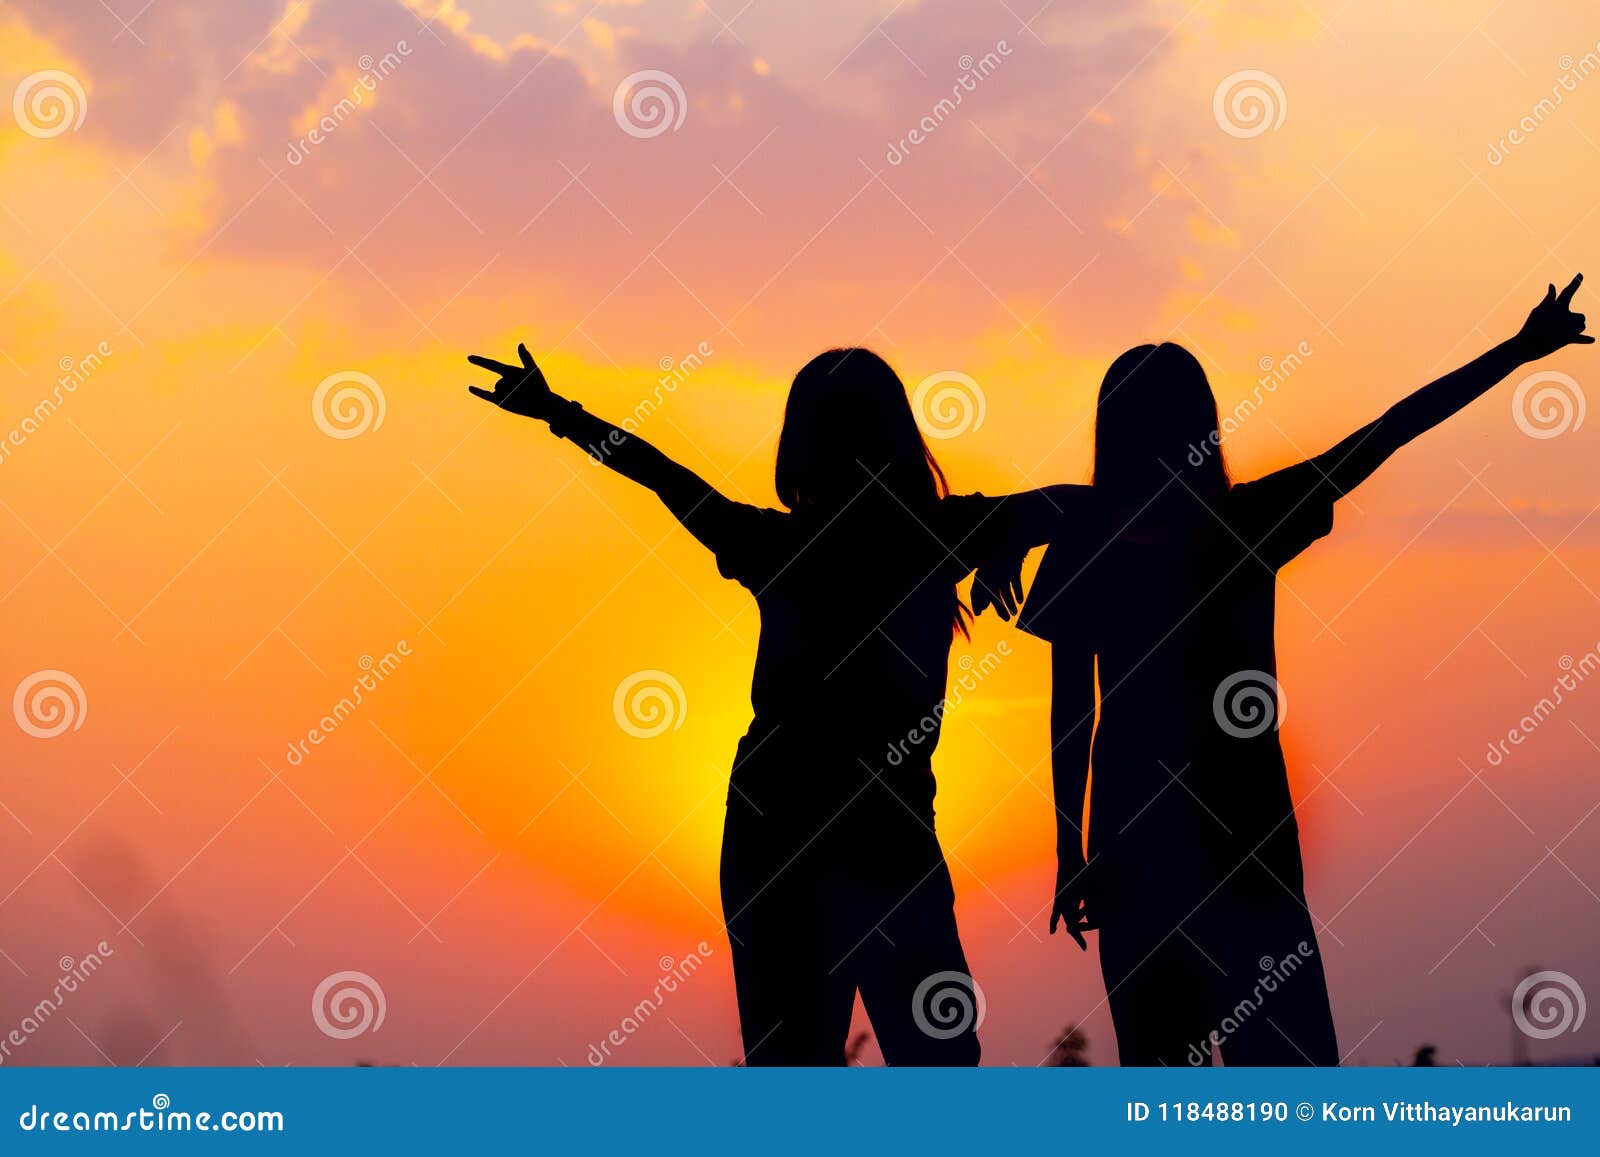 Silhouette of Two Girls Friend Happy Friendship Sunset View Stock ...